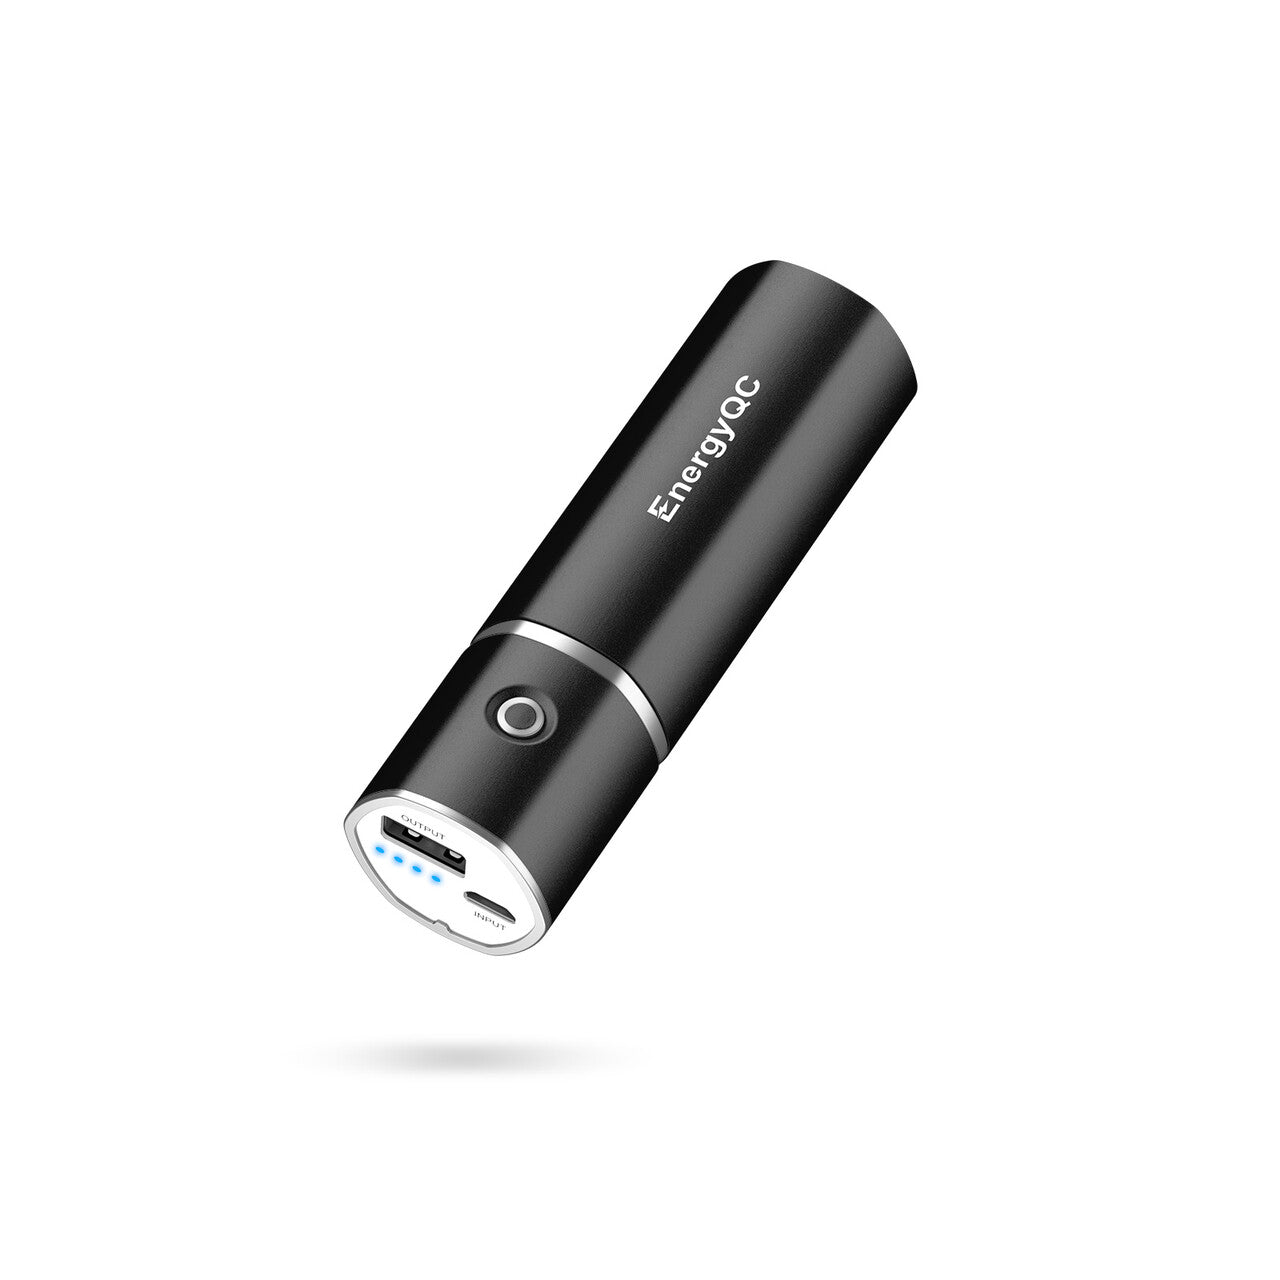 EnergyQC Slim 2 Portable Charger,Ultra-Compact 5000mAh Power Bank External Battery Compatible with iPhone,Samsung Galaxy,Airpods and More